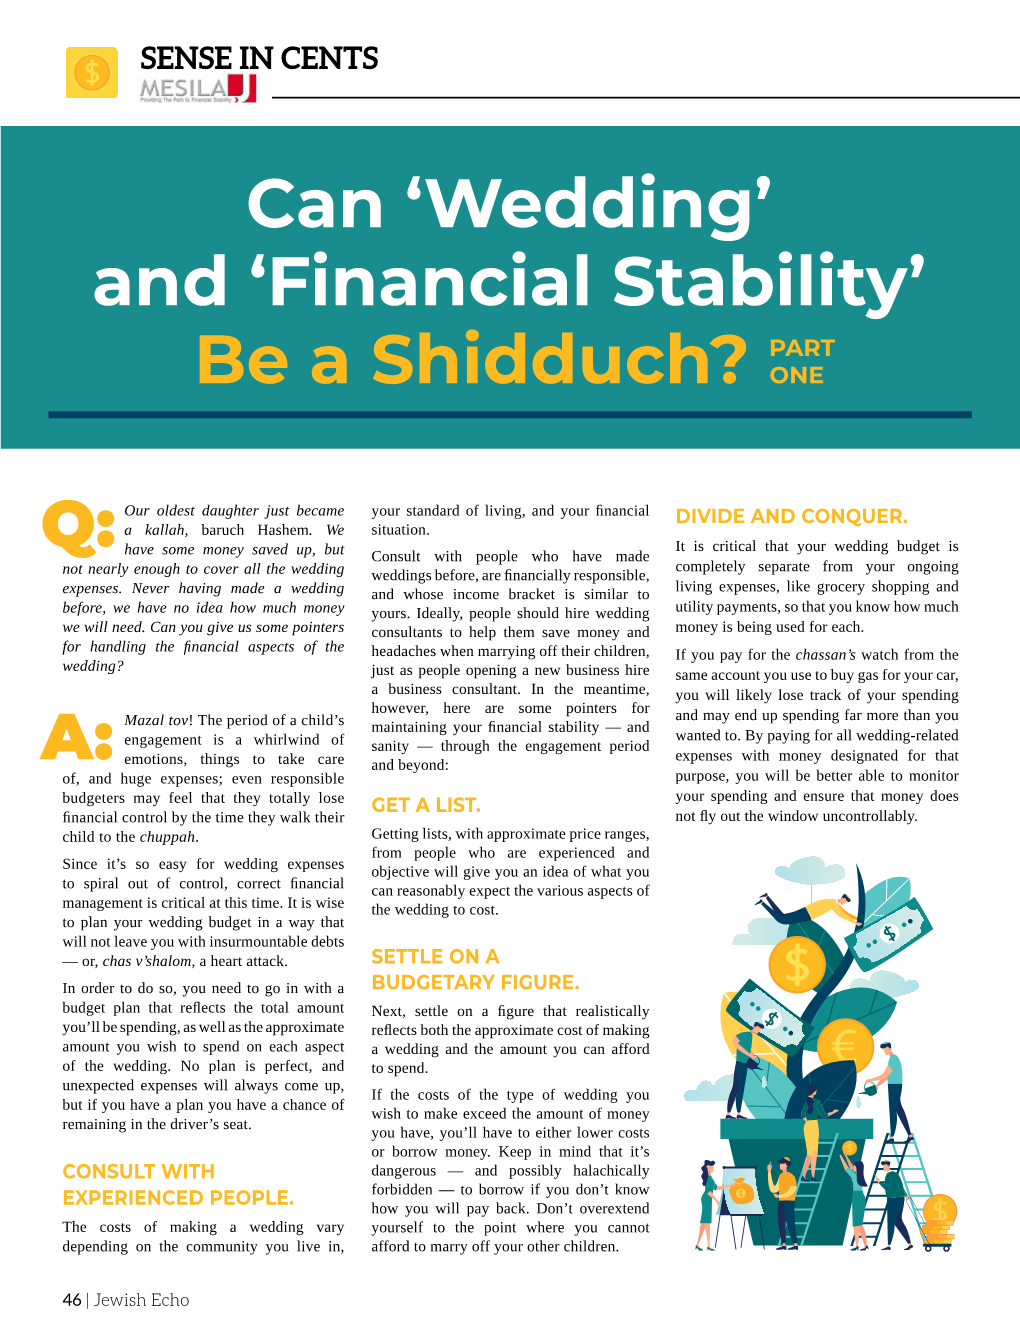 Can 'Wedding' and 'Financial Stability' Be a Shidduch?